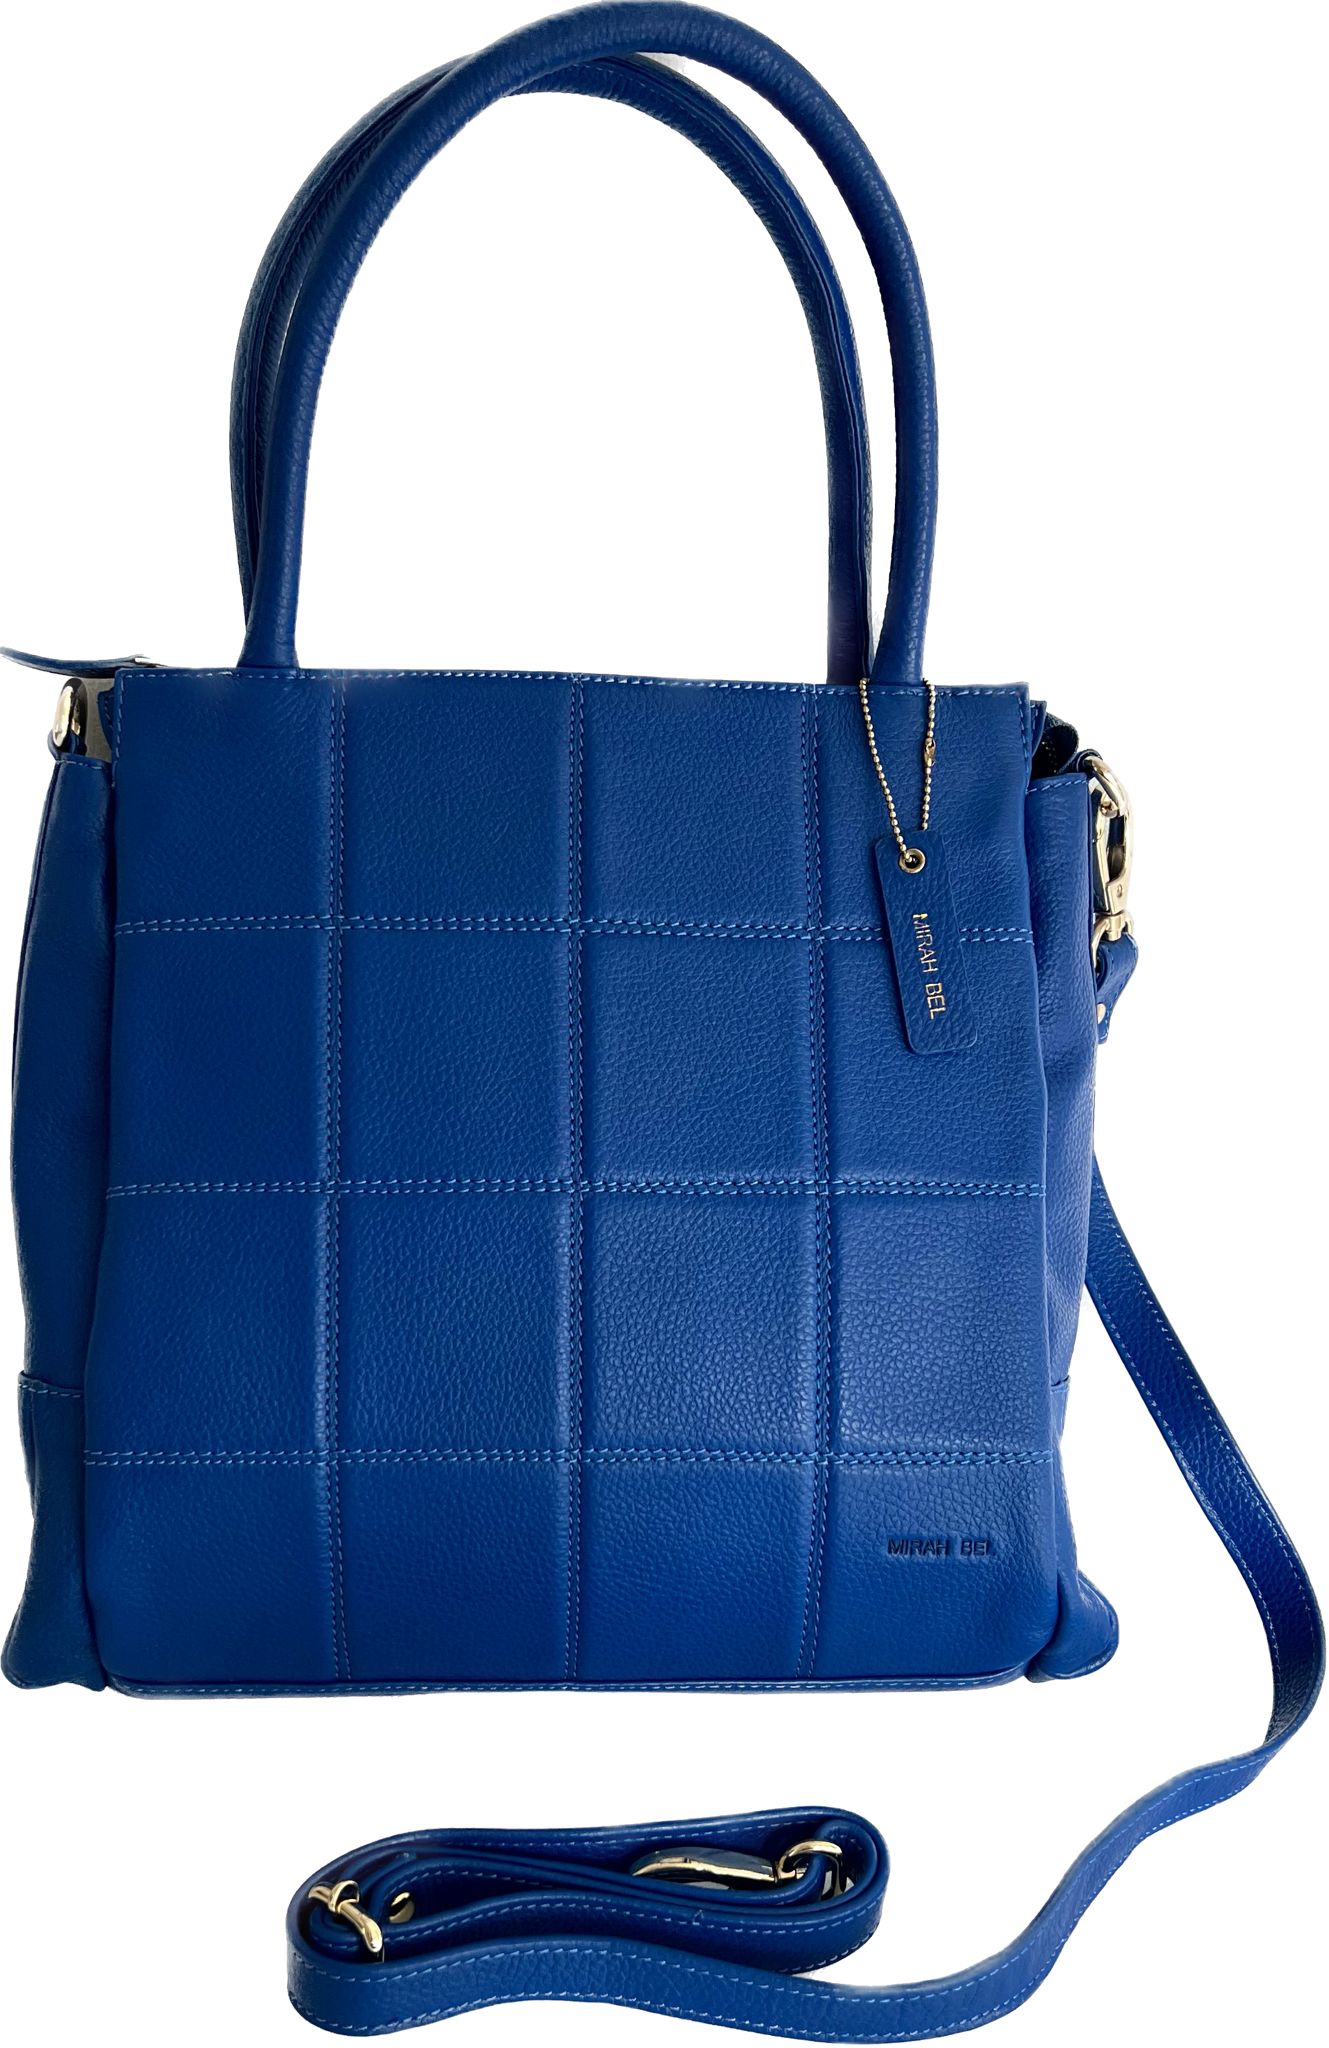 Christian Siriano Bumble Bee Shoulder Bag in Blue